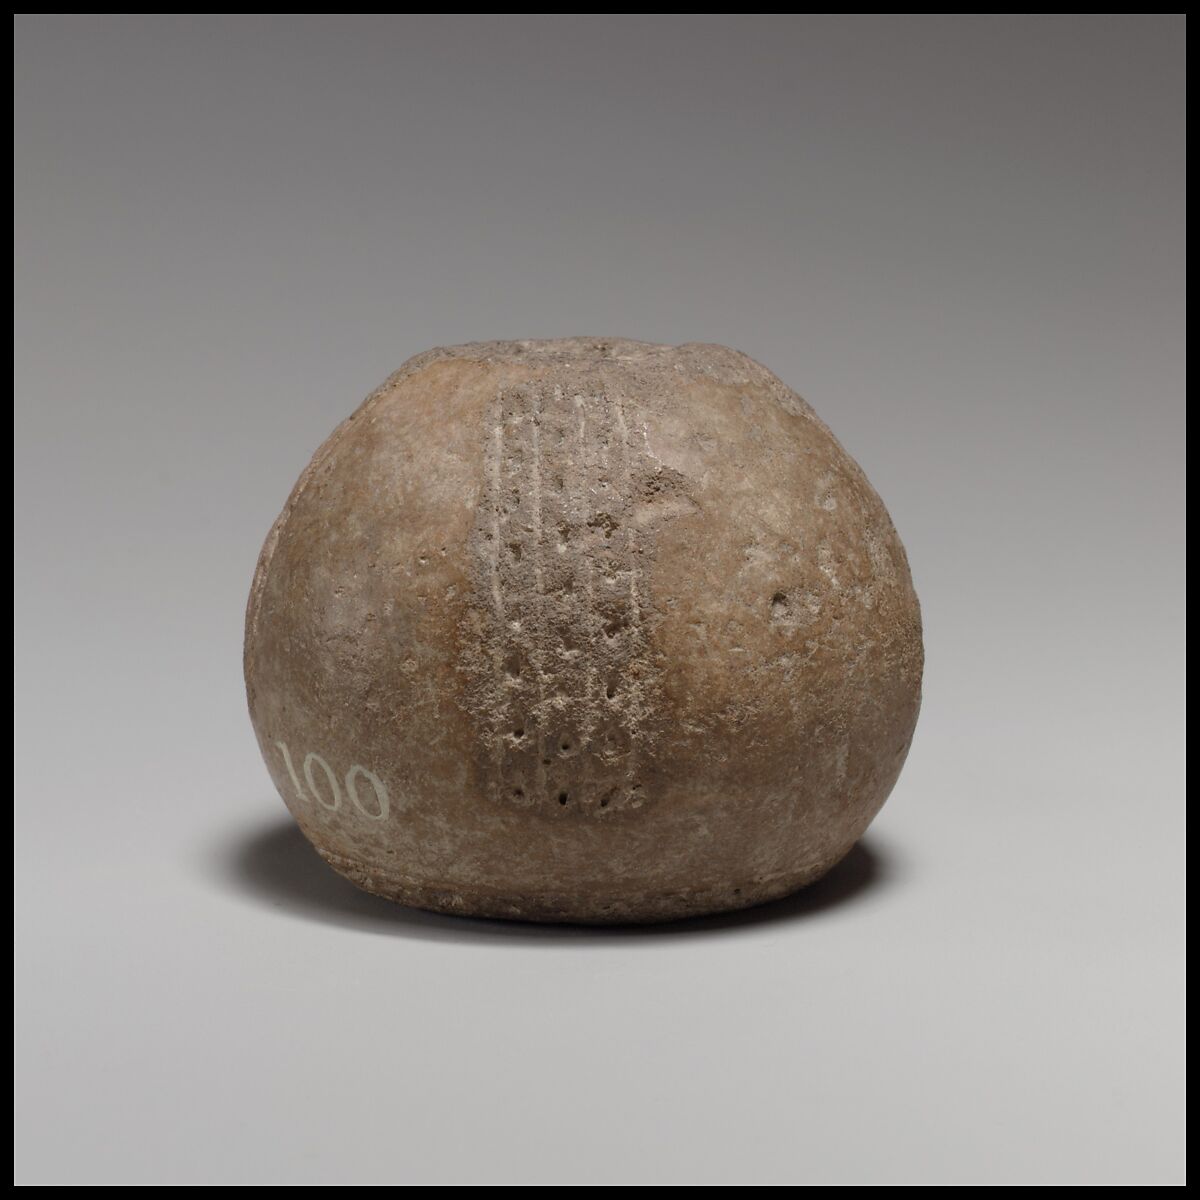 Terracotta conical-hemispherical spindle-whorl with flat base, Terracotta, Cypriot 